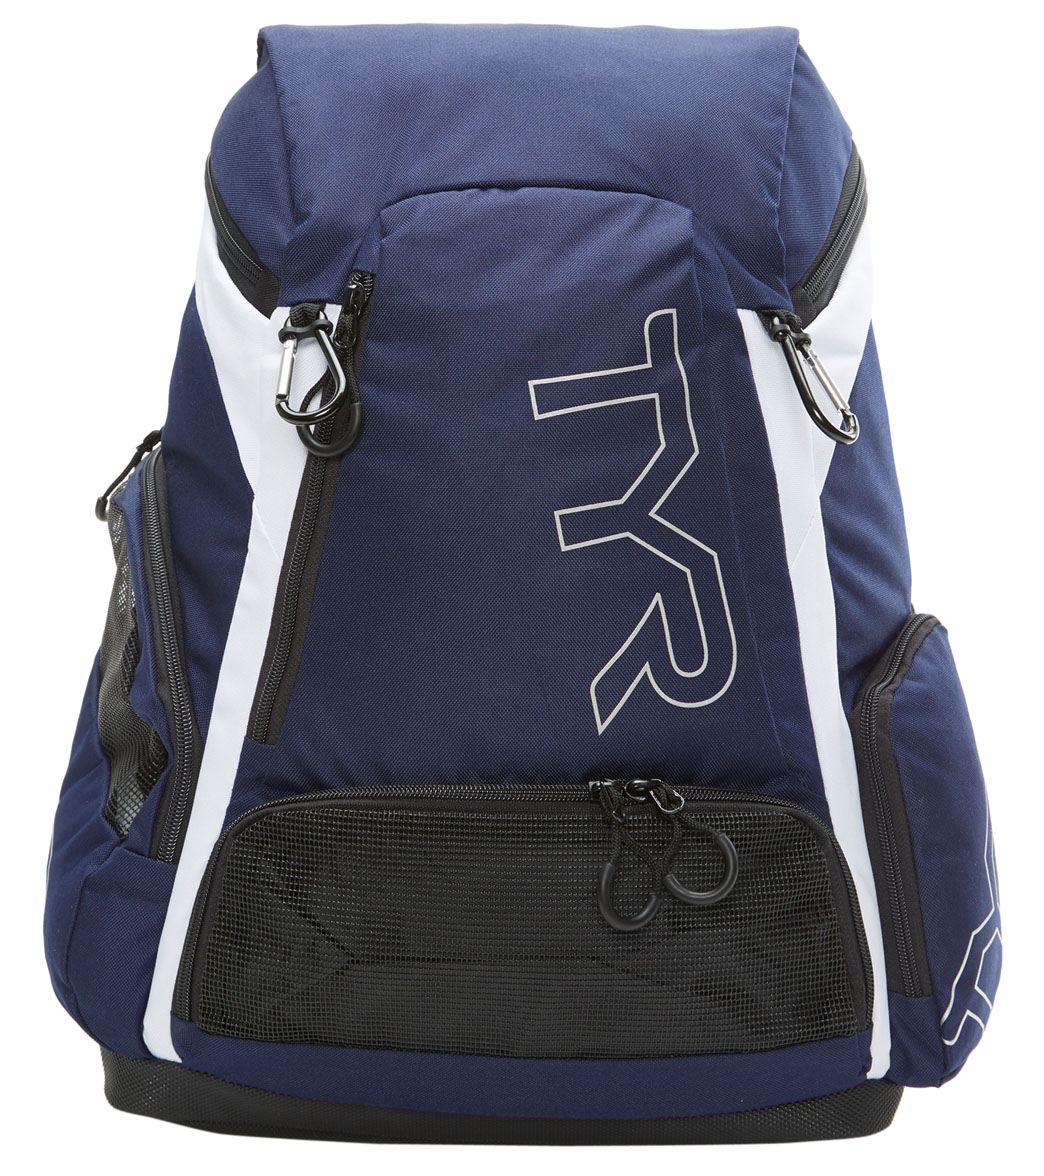 TYR Alliance 30L Backpack - White/Navy - Swimoutlet.com